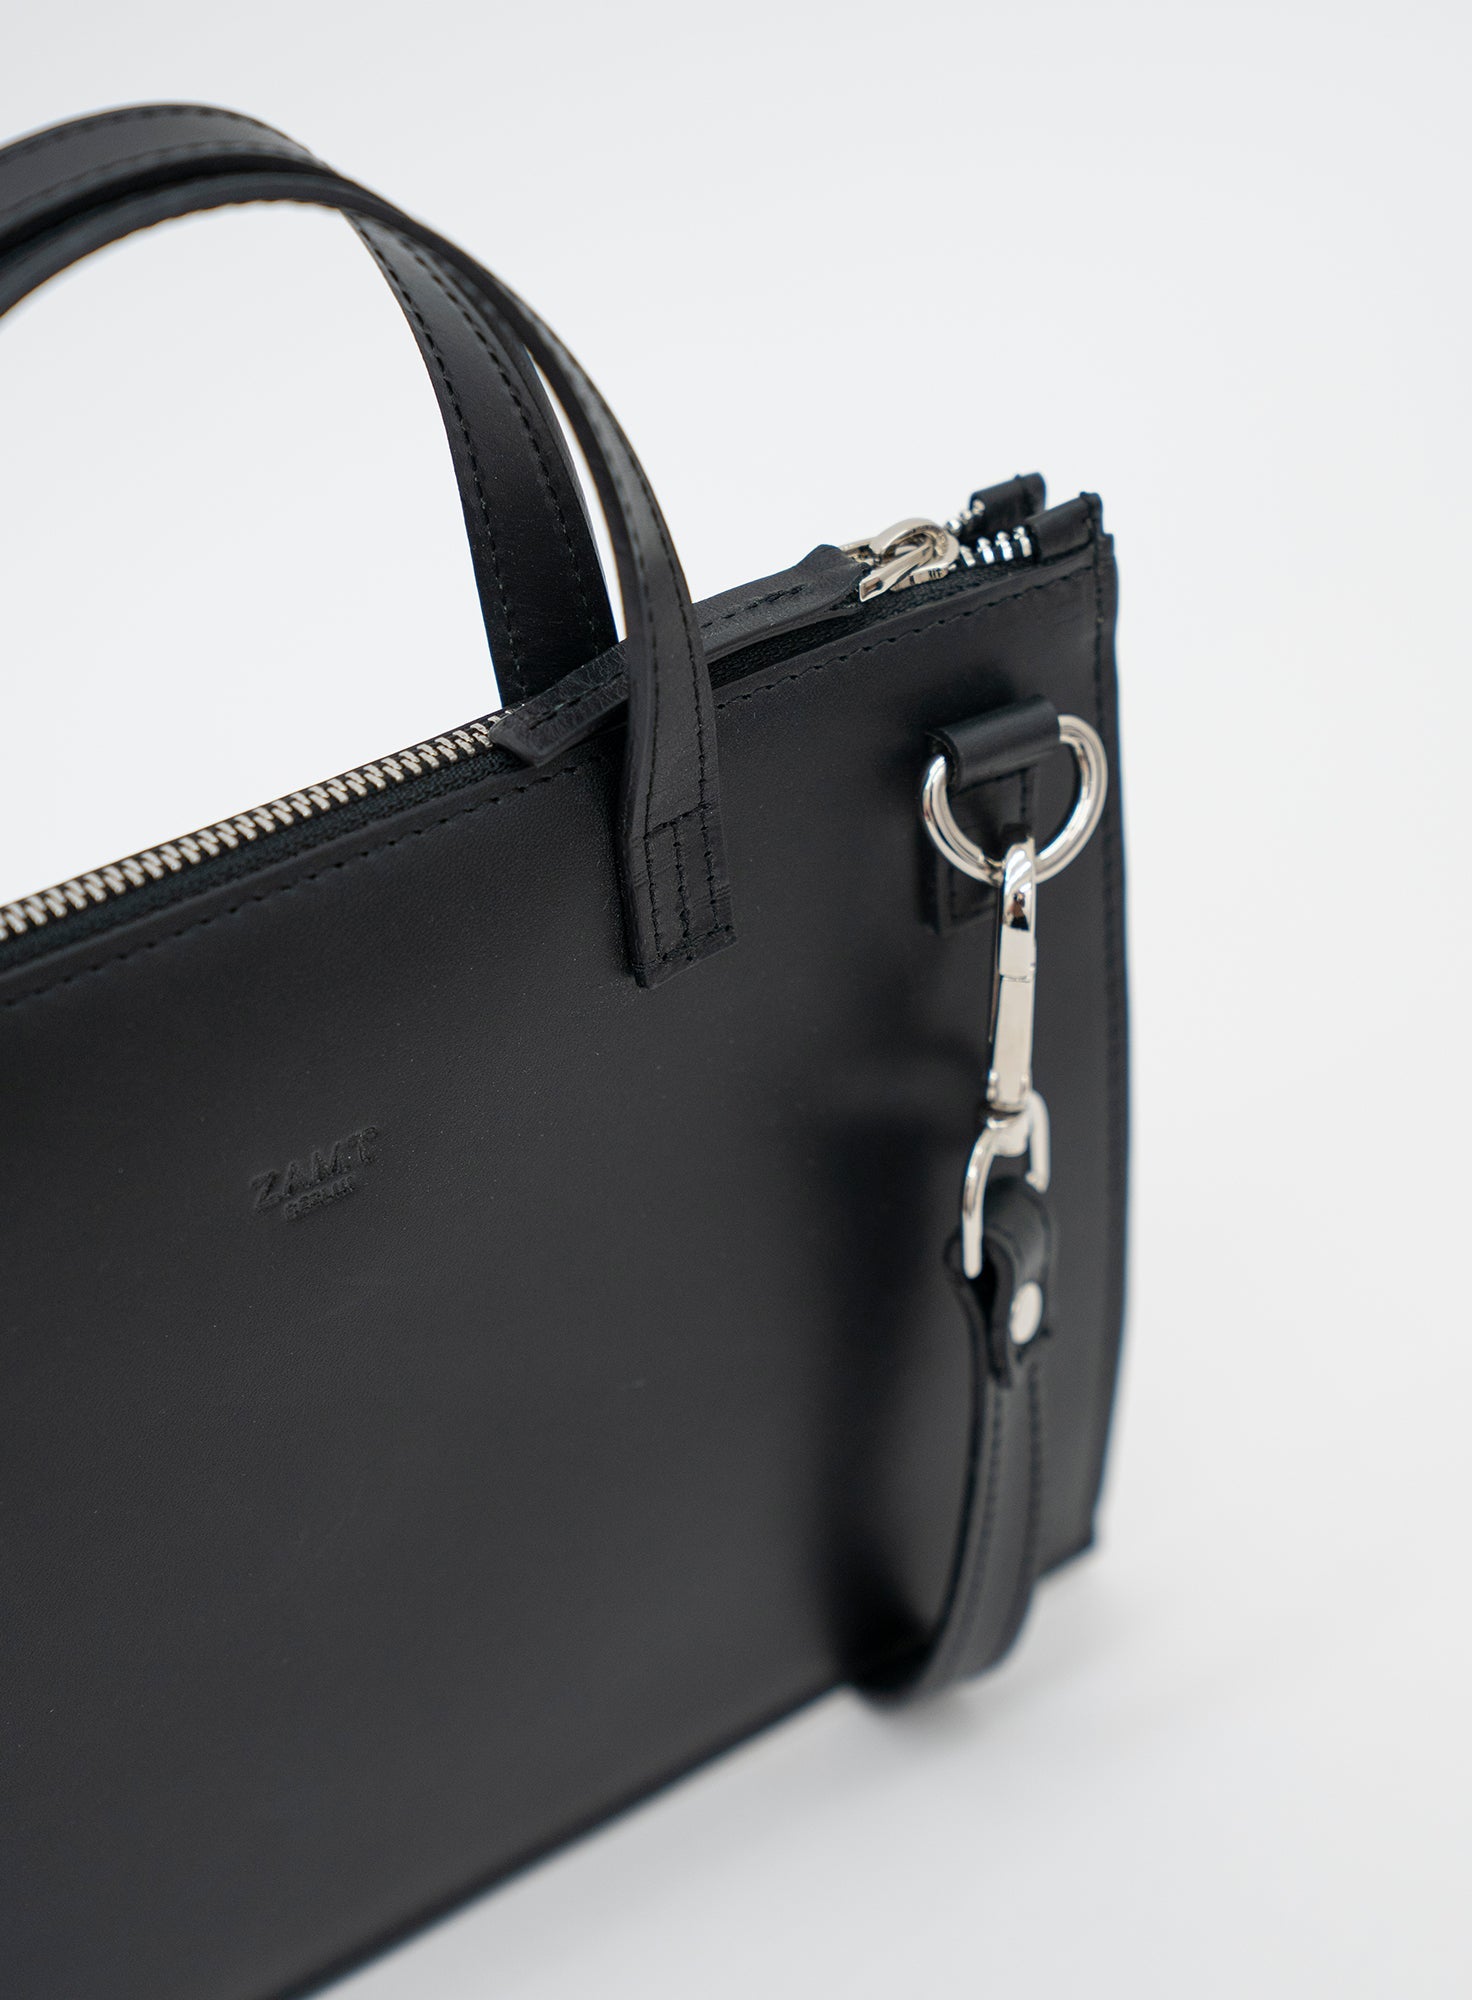 CROSSBODY_POUCH_LEYAN_BLACK_Designed_in_Berlin_Made_to_last_Handmade_in_Poland.